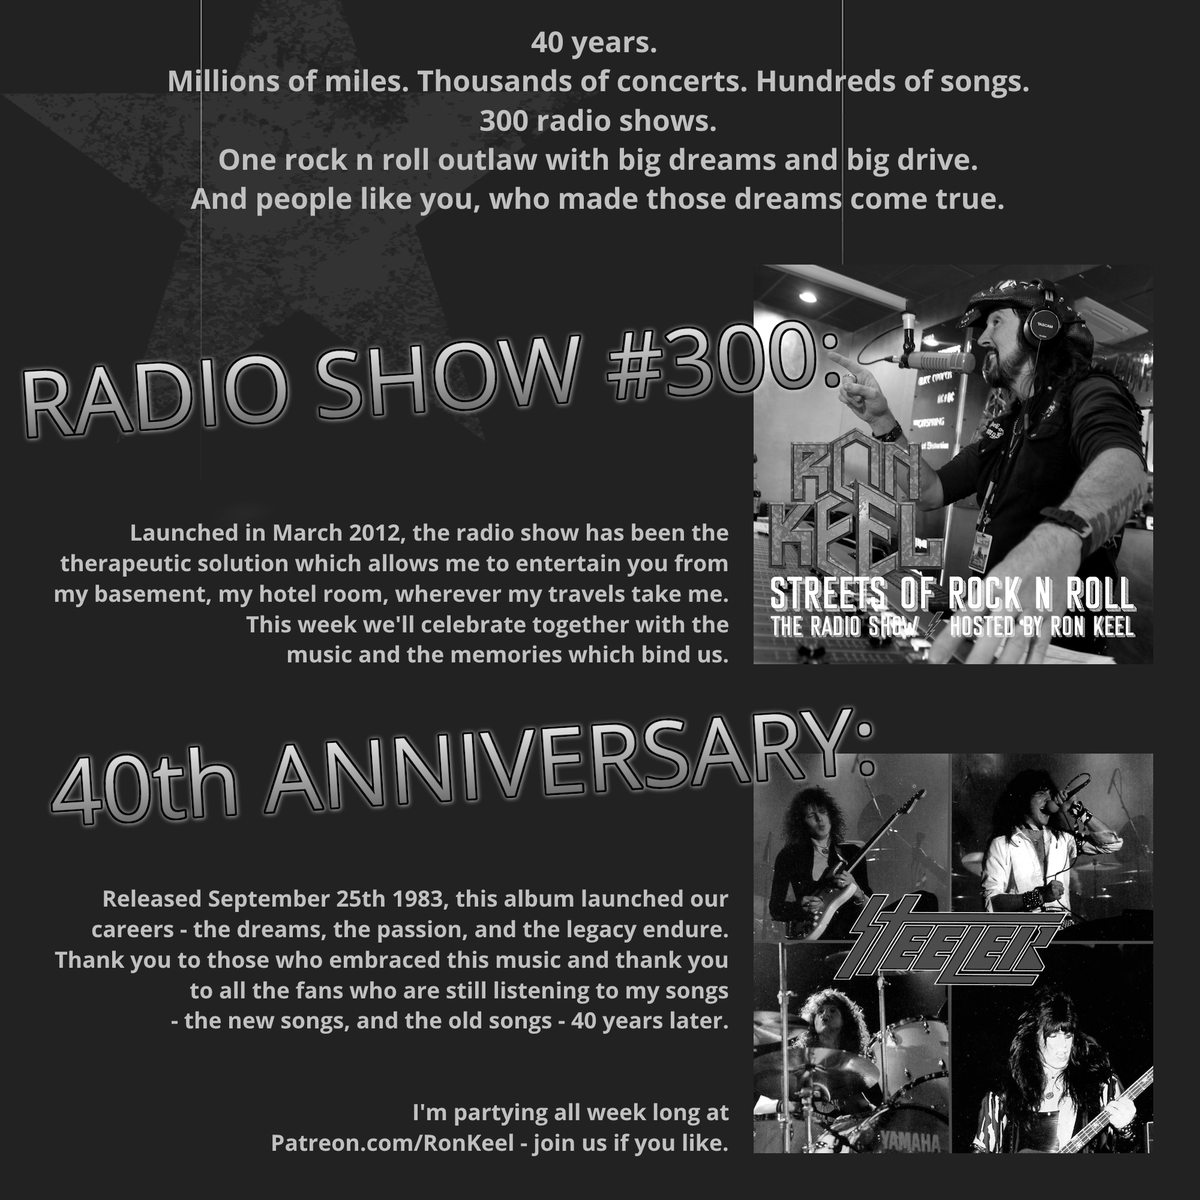 Happy Monday! Big week in the RK camp, celebrating the 300th episode of the STREETS OF ROCK N ROLL radio show, & the 40th anniversary of the STEELER album. Members at patreon.com/ronkeel are invited to call the studio line and be on the show, details on the Patreon page.